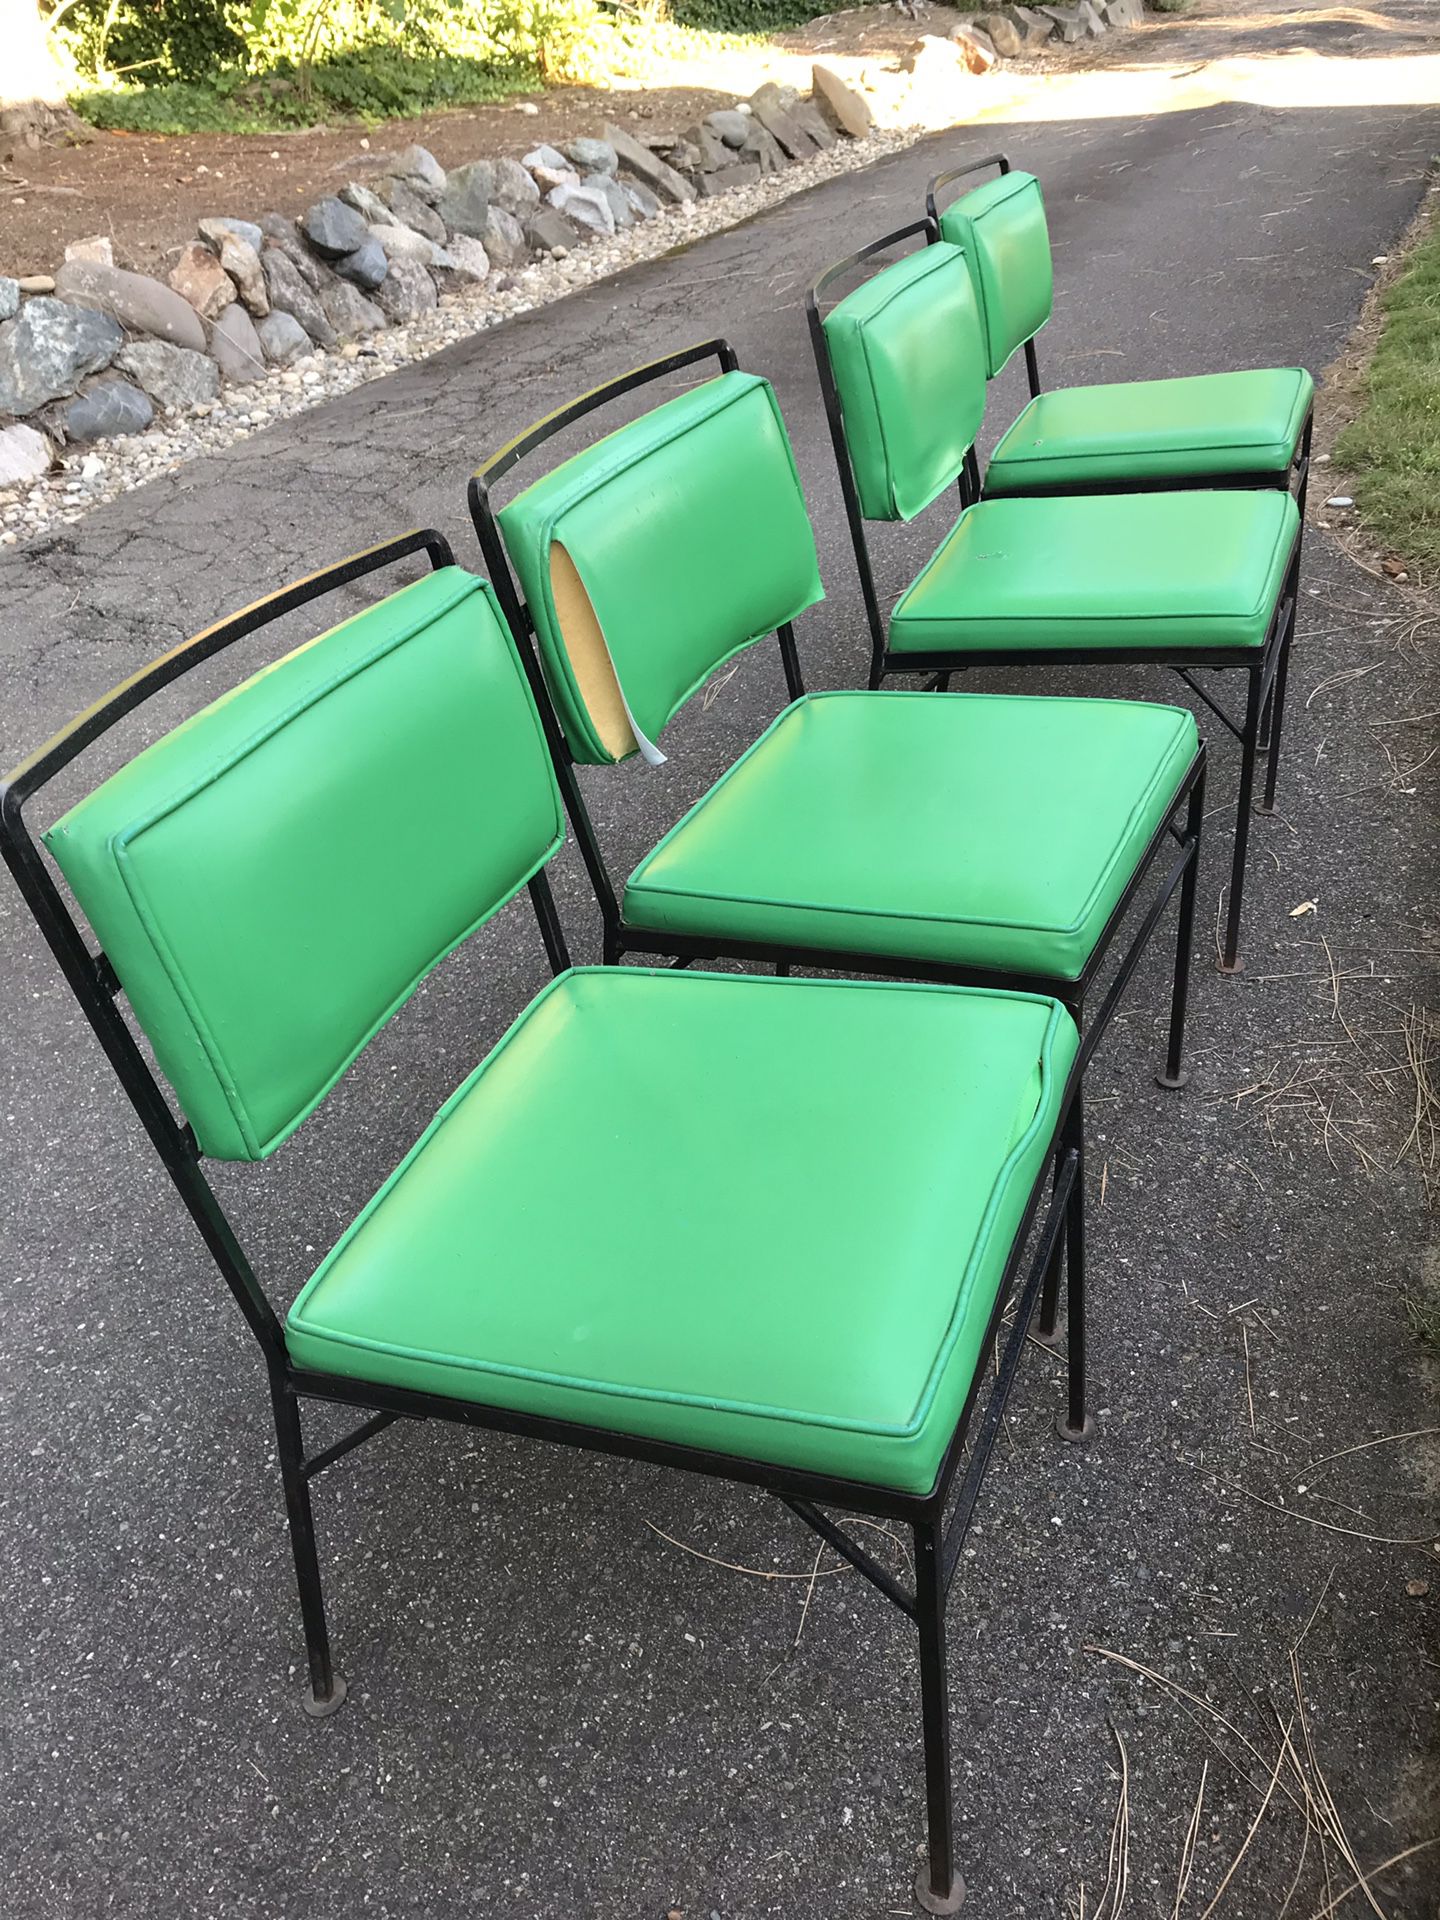 Still available. FREE MCM Iron patio chairs